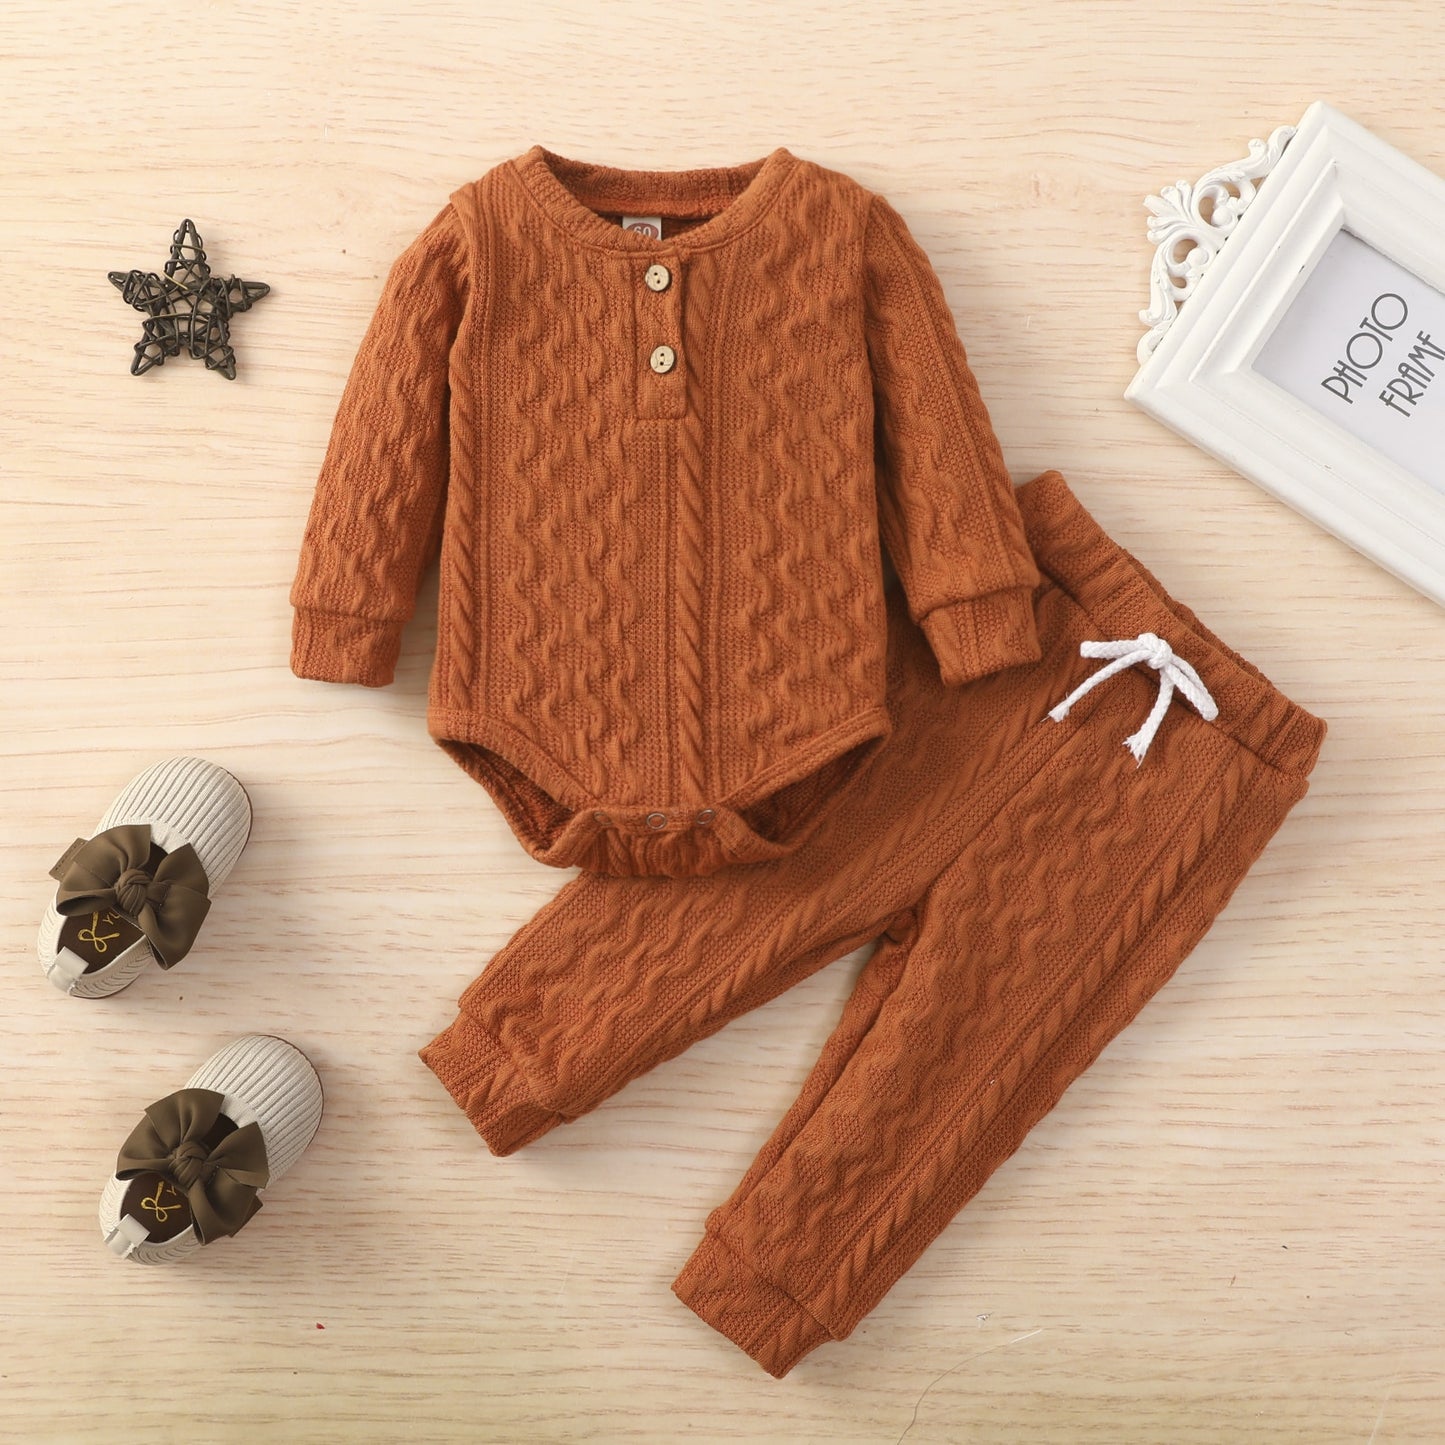 Lioraitiin 0-24M Baby Girl Romper Tops Pants Suit Newborn Infant Long Sleeve Round Neck Button Sweater Knitting Trousers